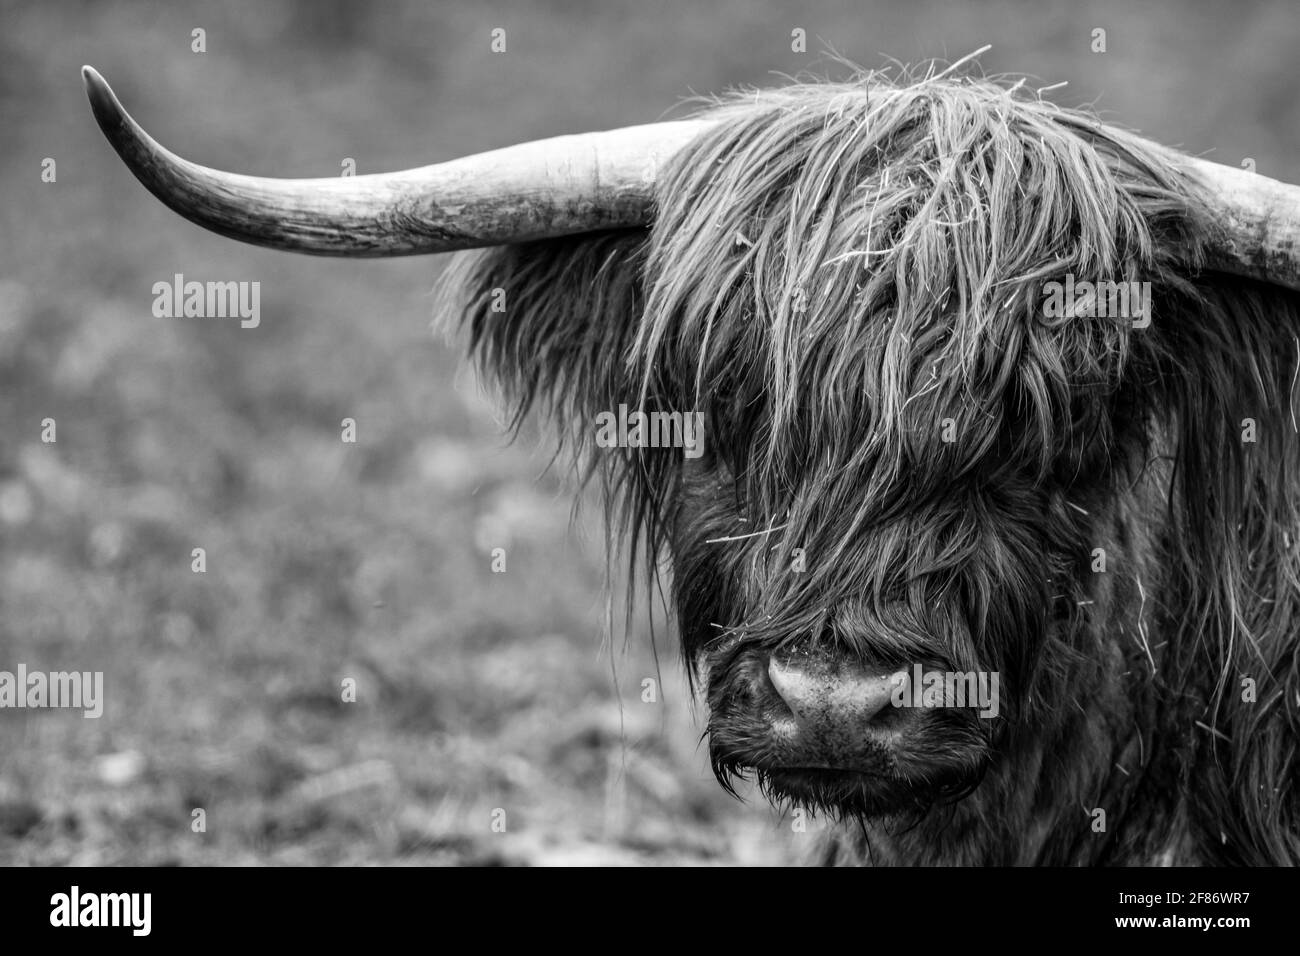 A Scottish Highland Cattle with long horns Stock Photo